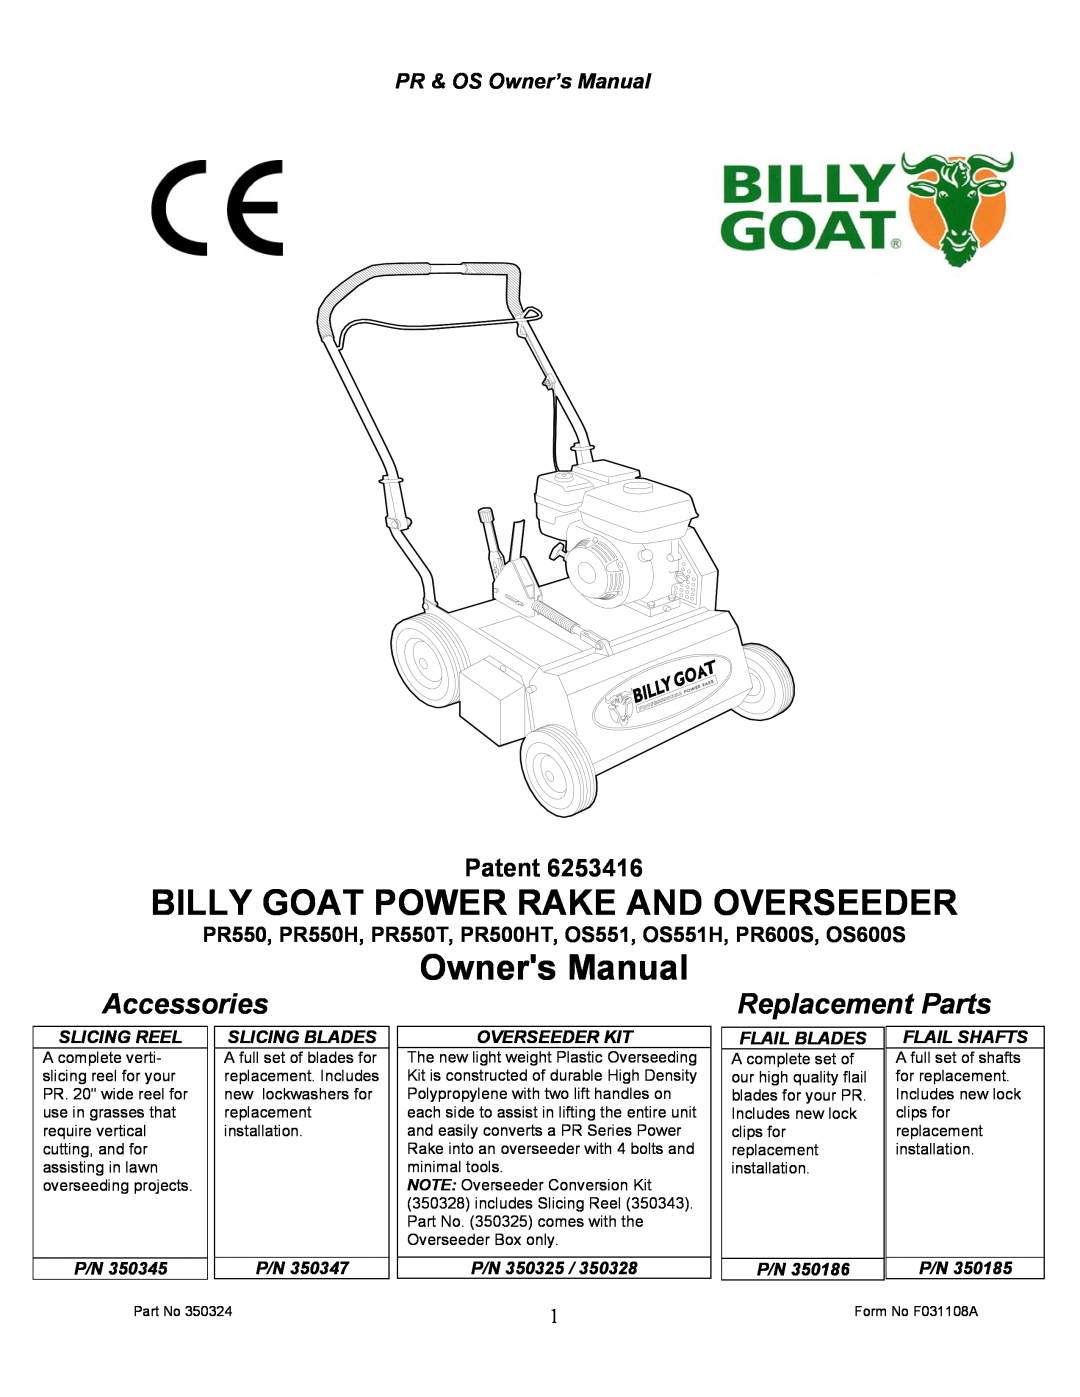 Billy Goat OS551 owner manual Patent, Billy Goat Power Rake And Overseeder, Accessories, Replacement Parts, Slicing Reel 